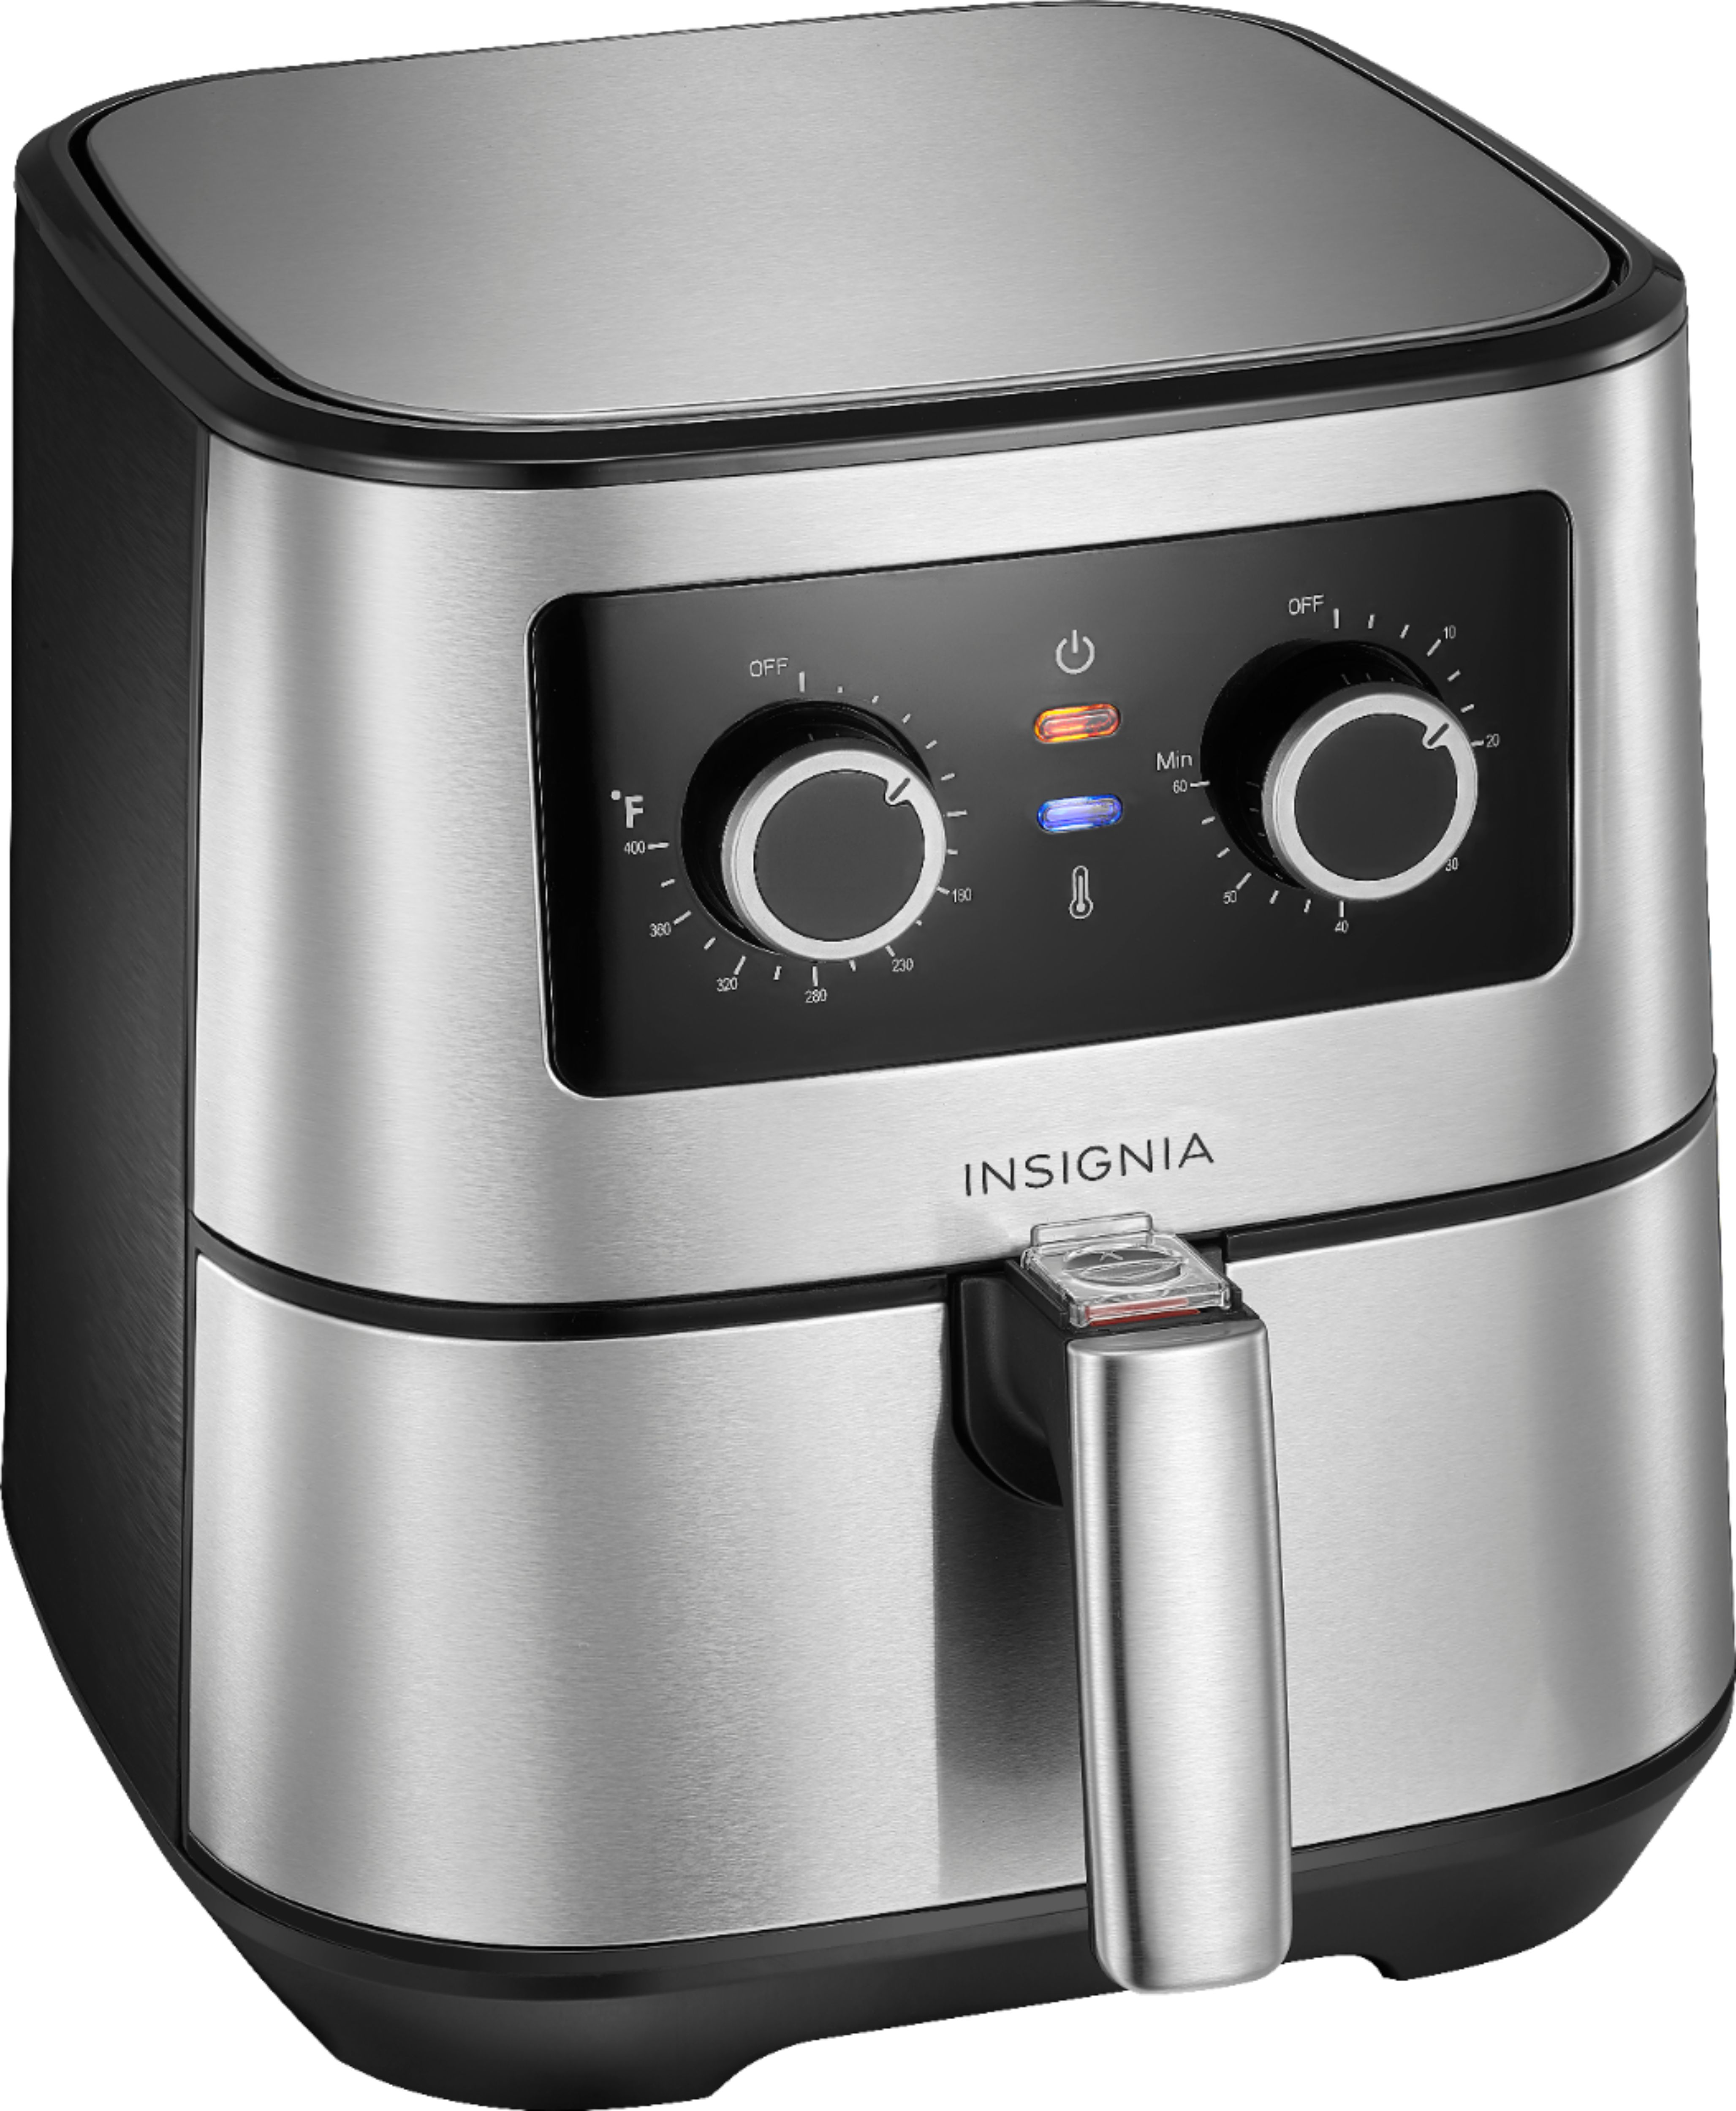 Angle View: Insignia™ - 5-qt. Analog Air Fryer - Stainless Steel